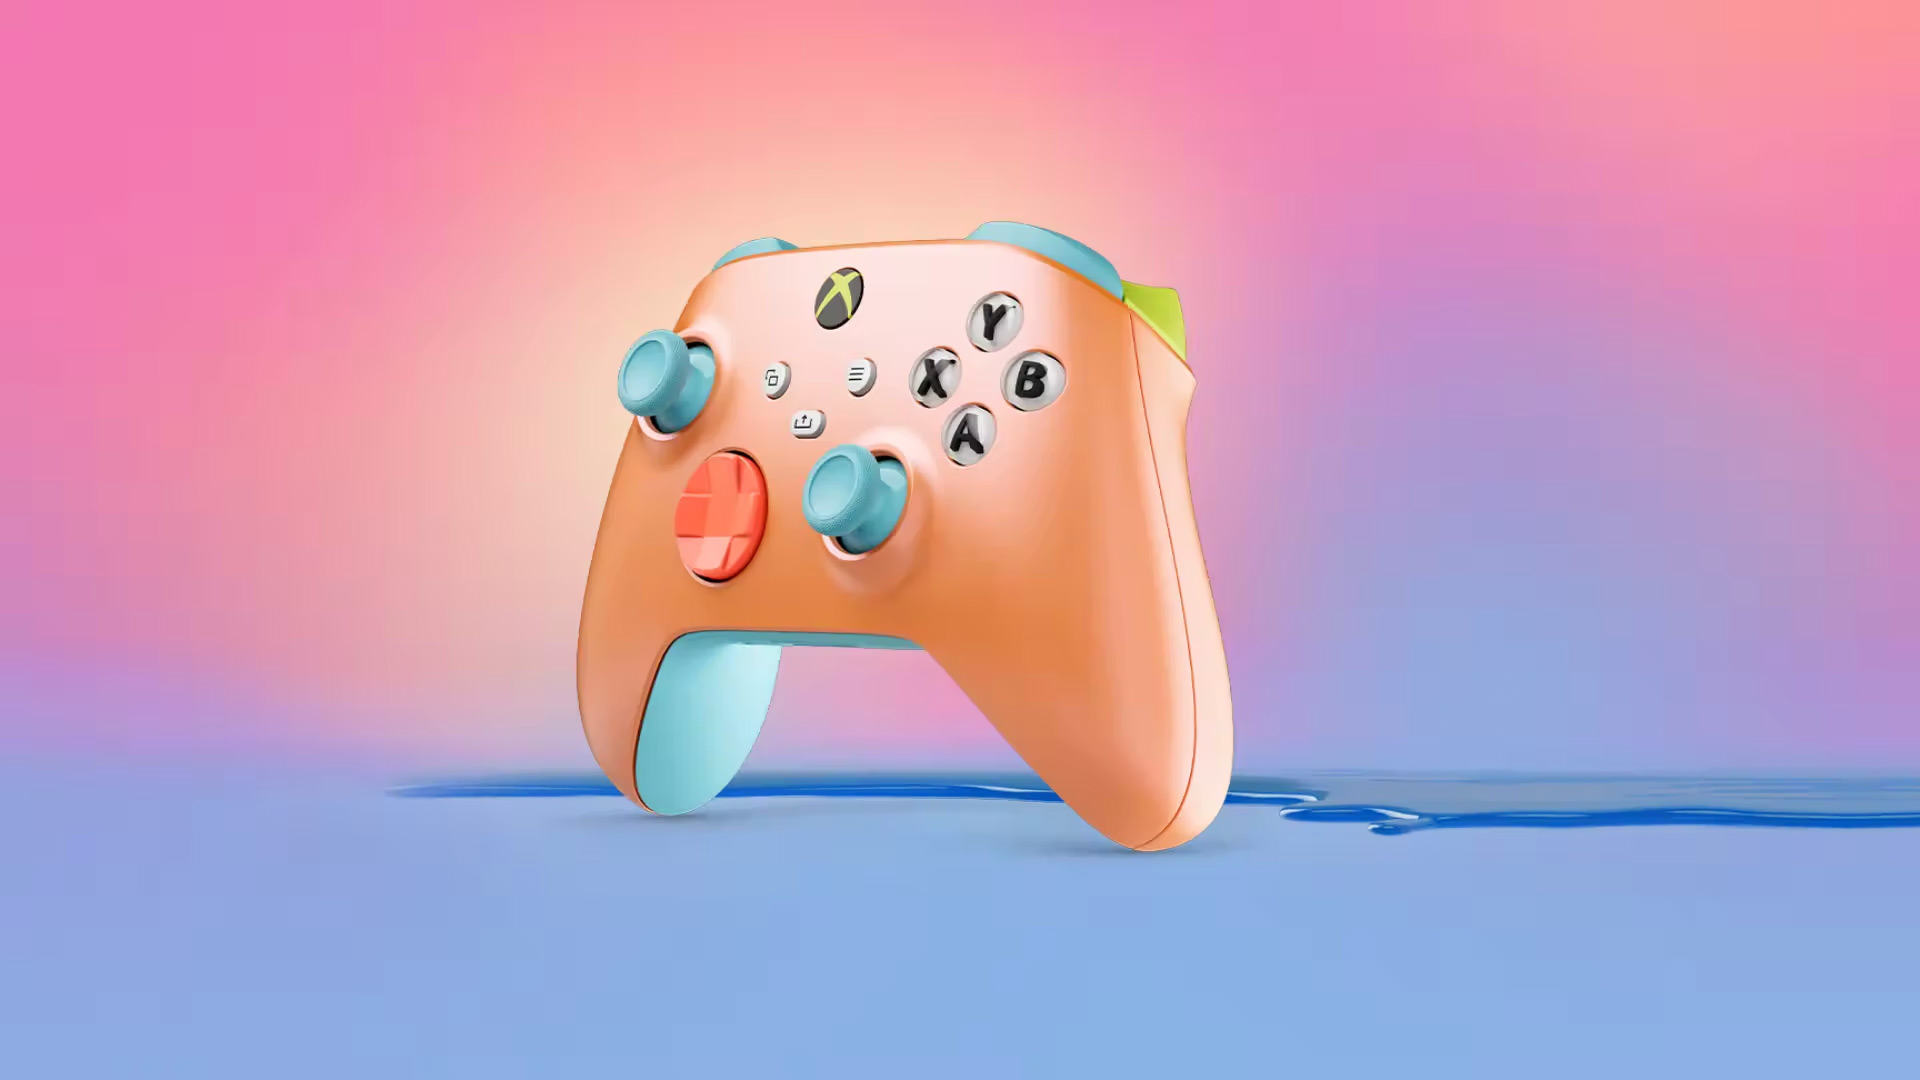 Xbox Wireless Controller Sunkissed Vibes OPI Special Edition